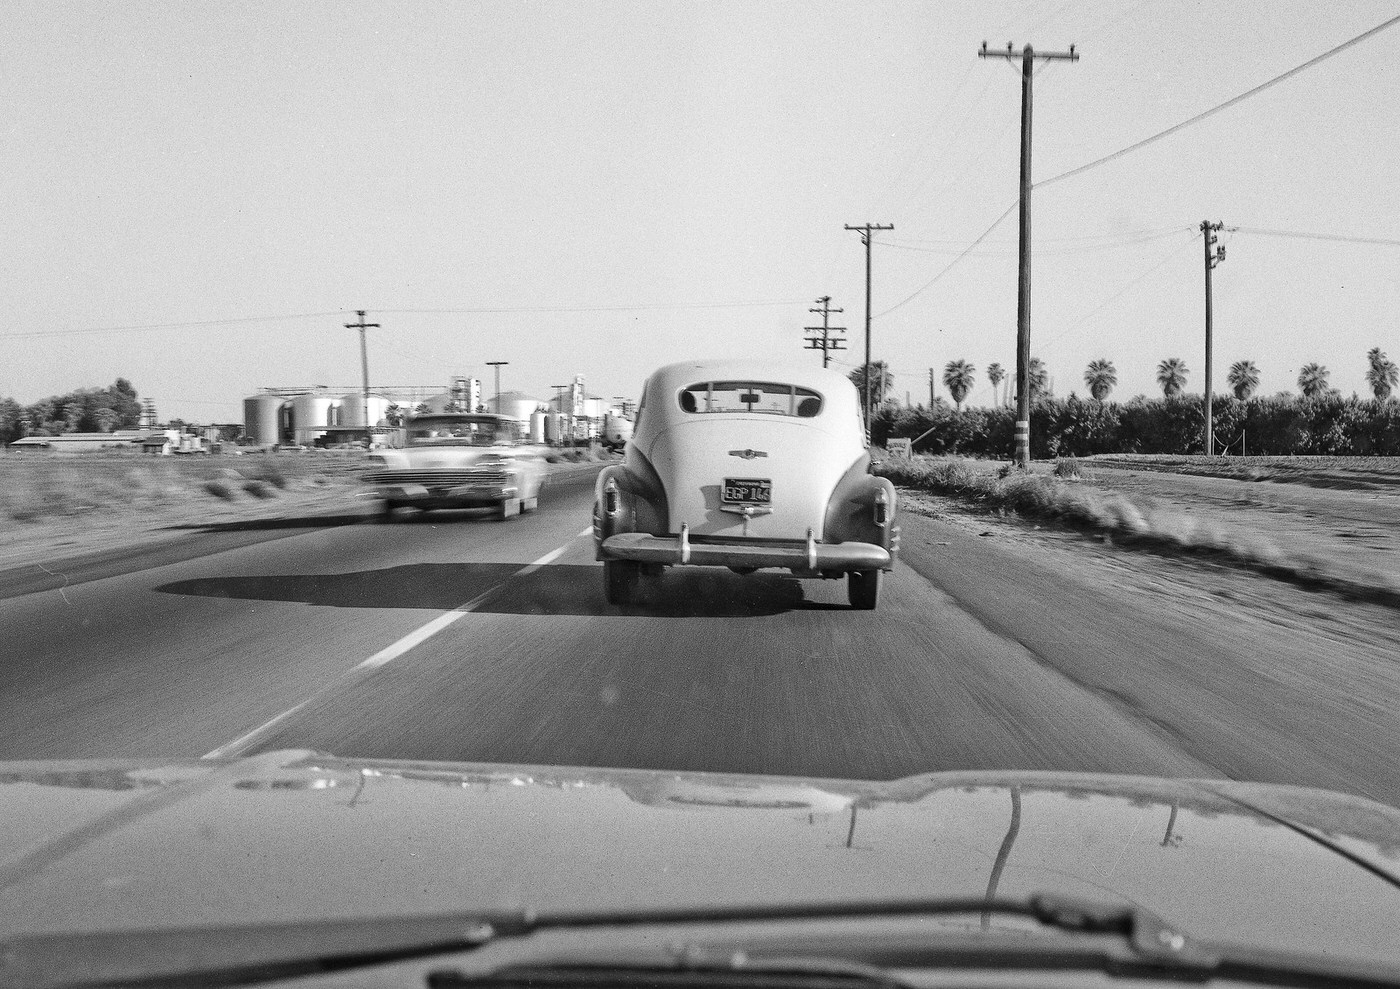 South bound on Clovis Ave in 1961 approx 1/2 mile from the Olive intersection in east Fresno, California.